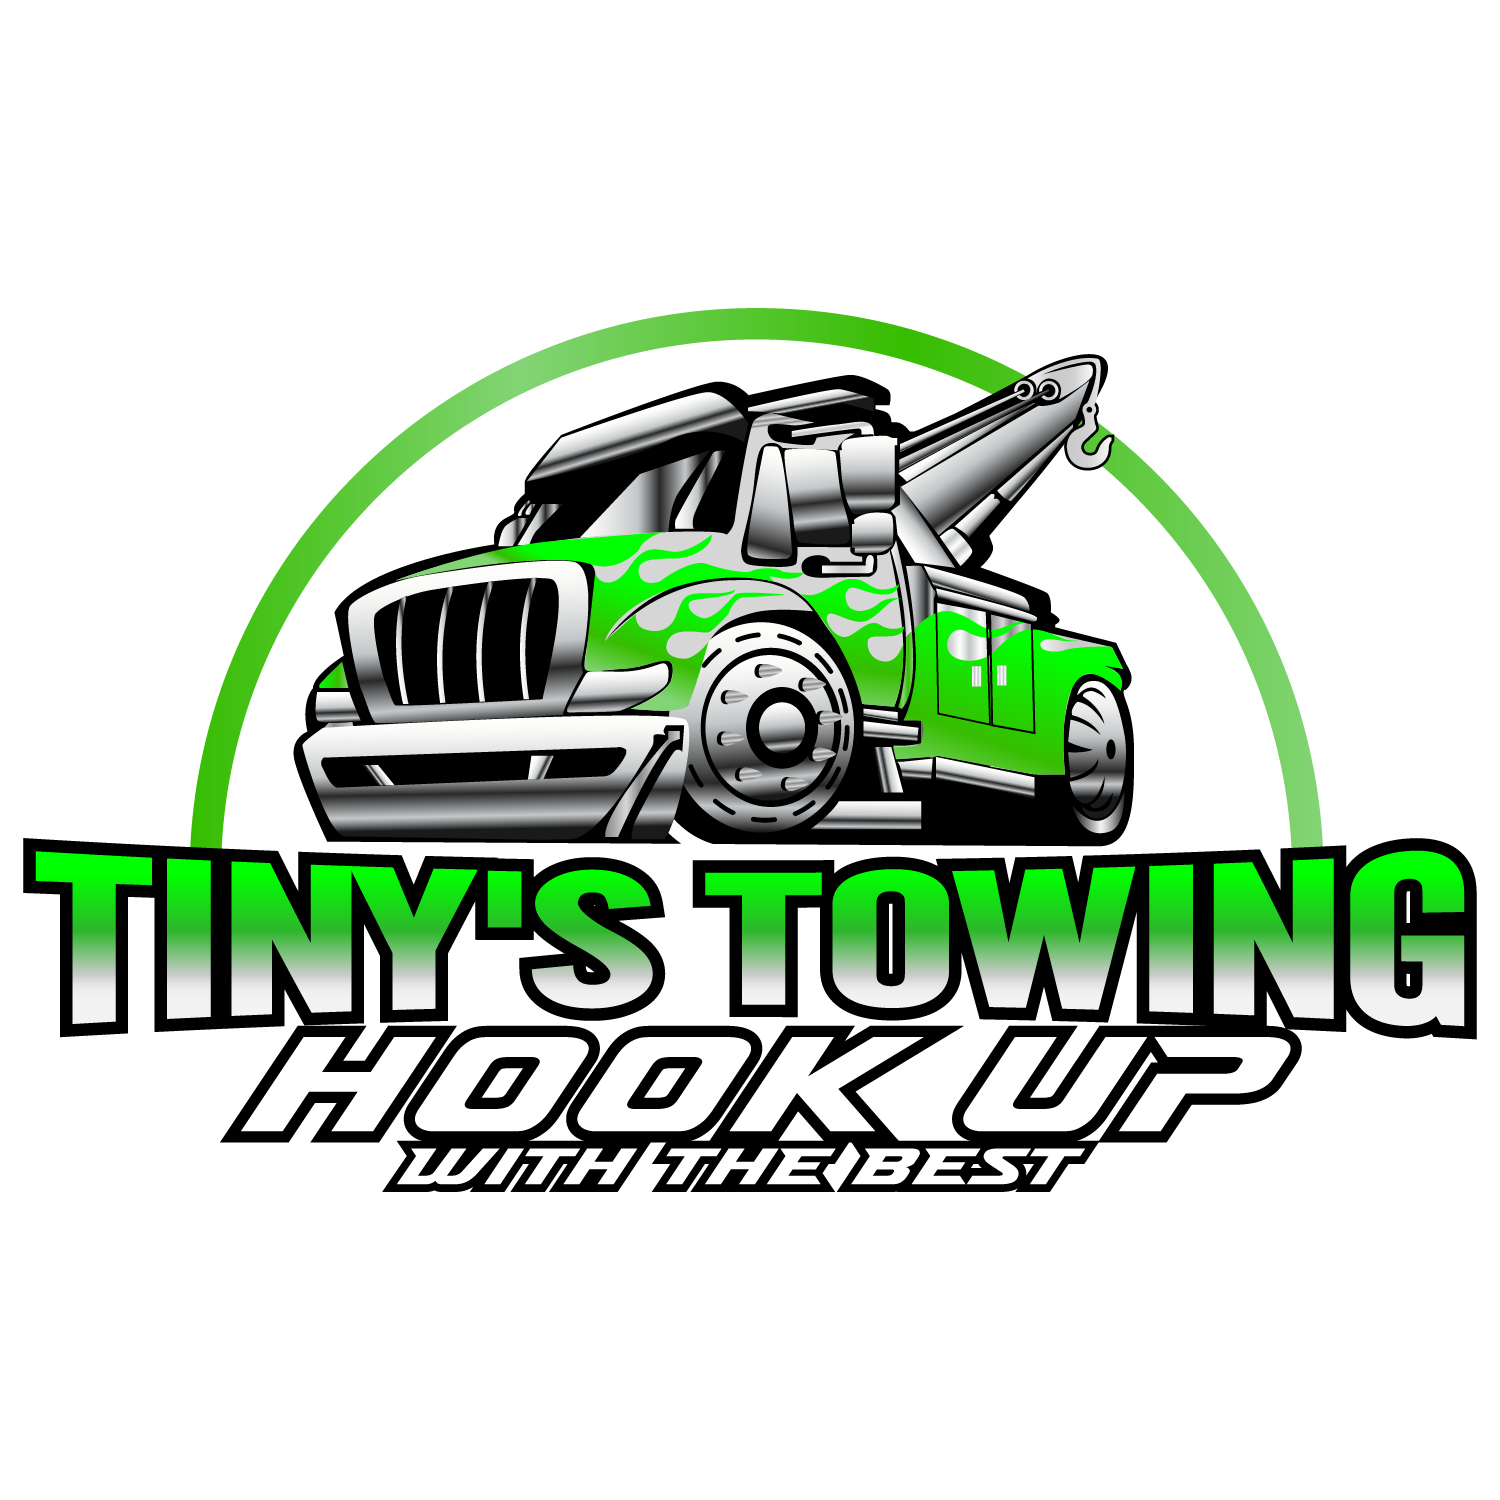 Business logo of Tiny’s Towing